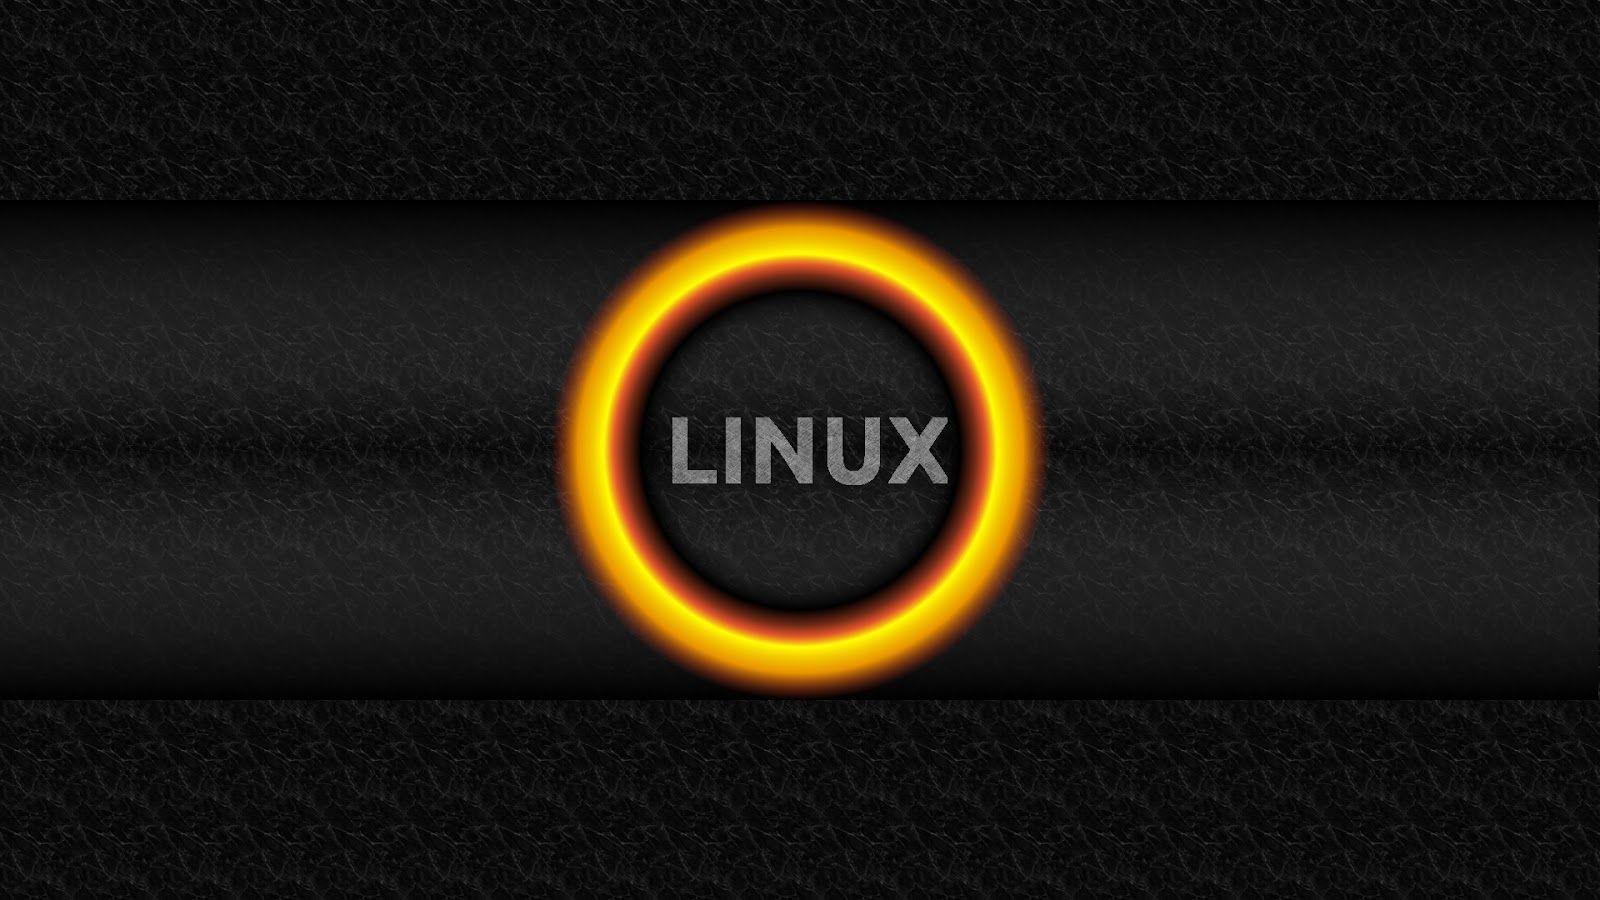 Android 用の Amazing Linux Hd Wallpapers Apk をダウンロード